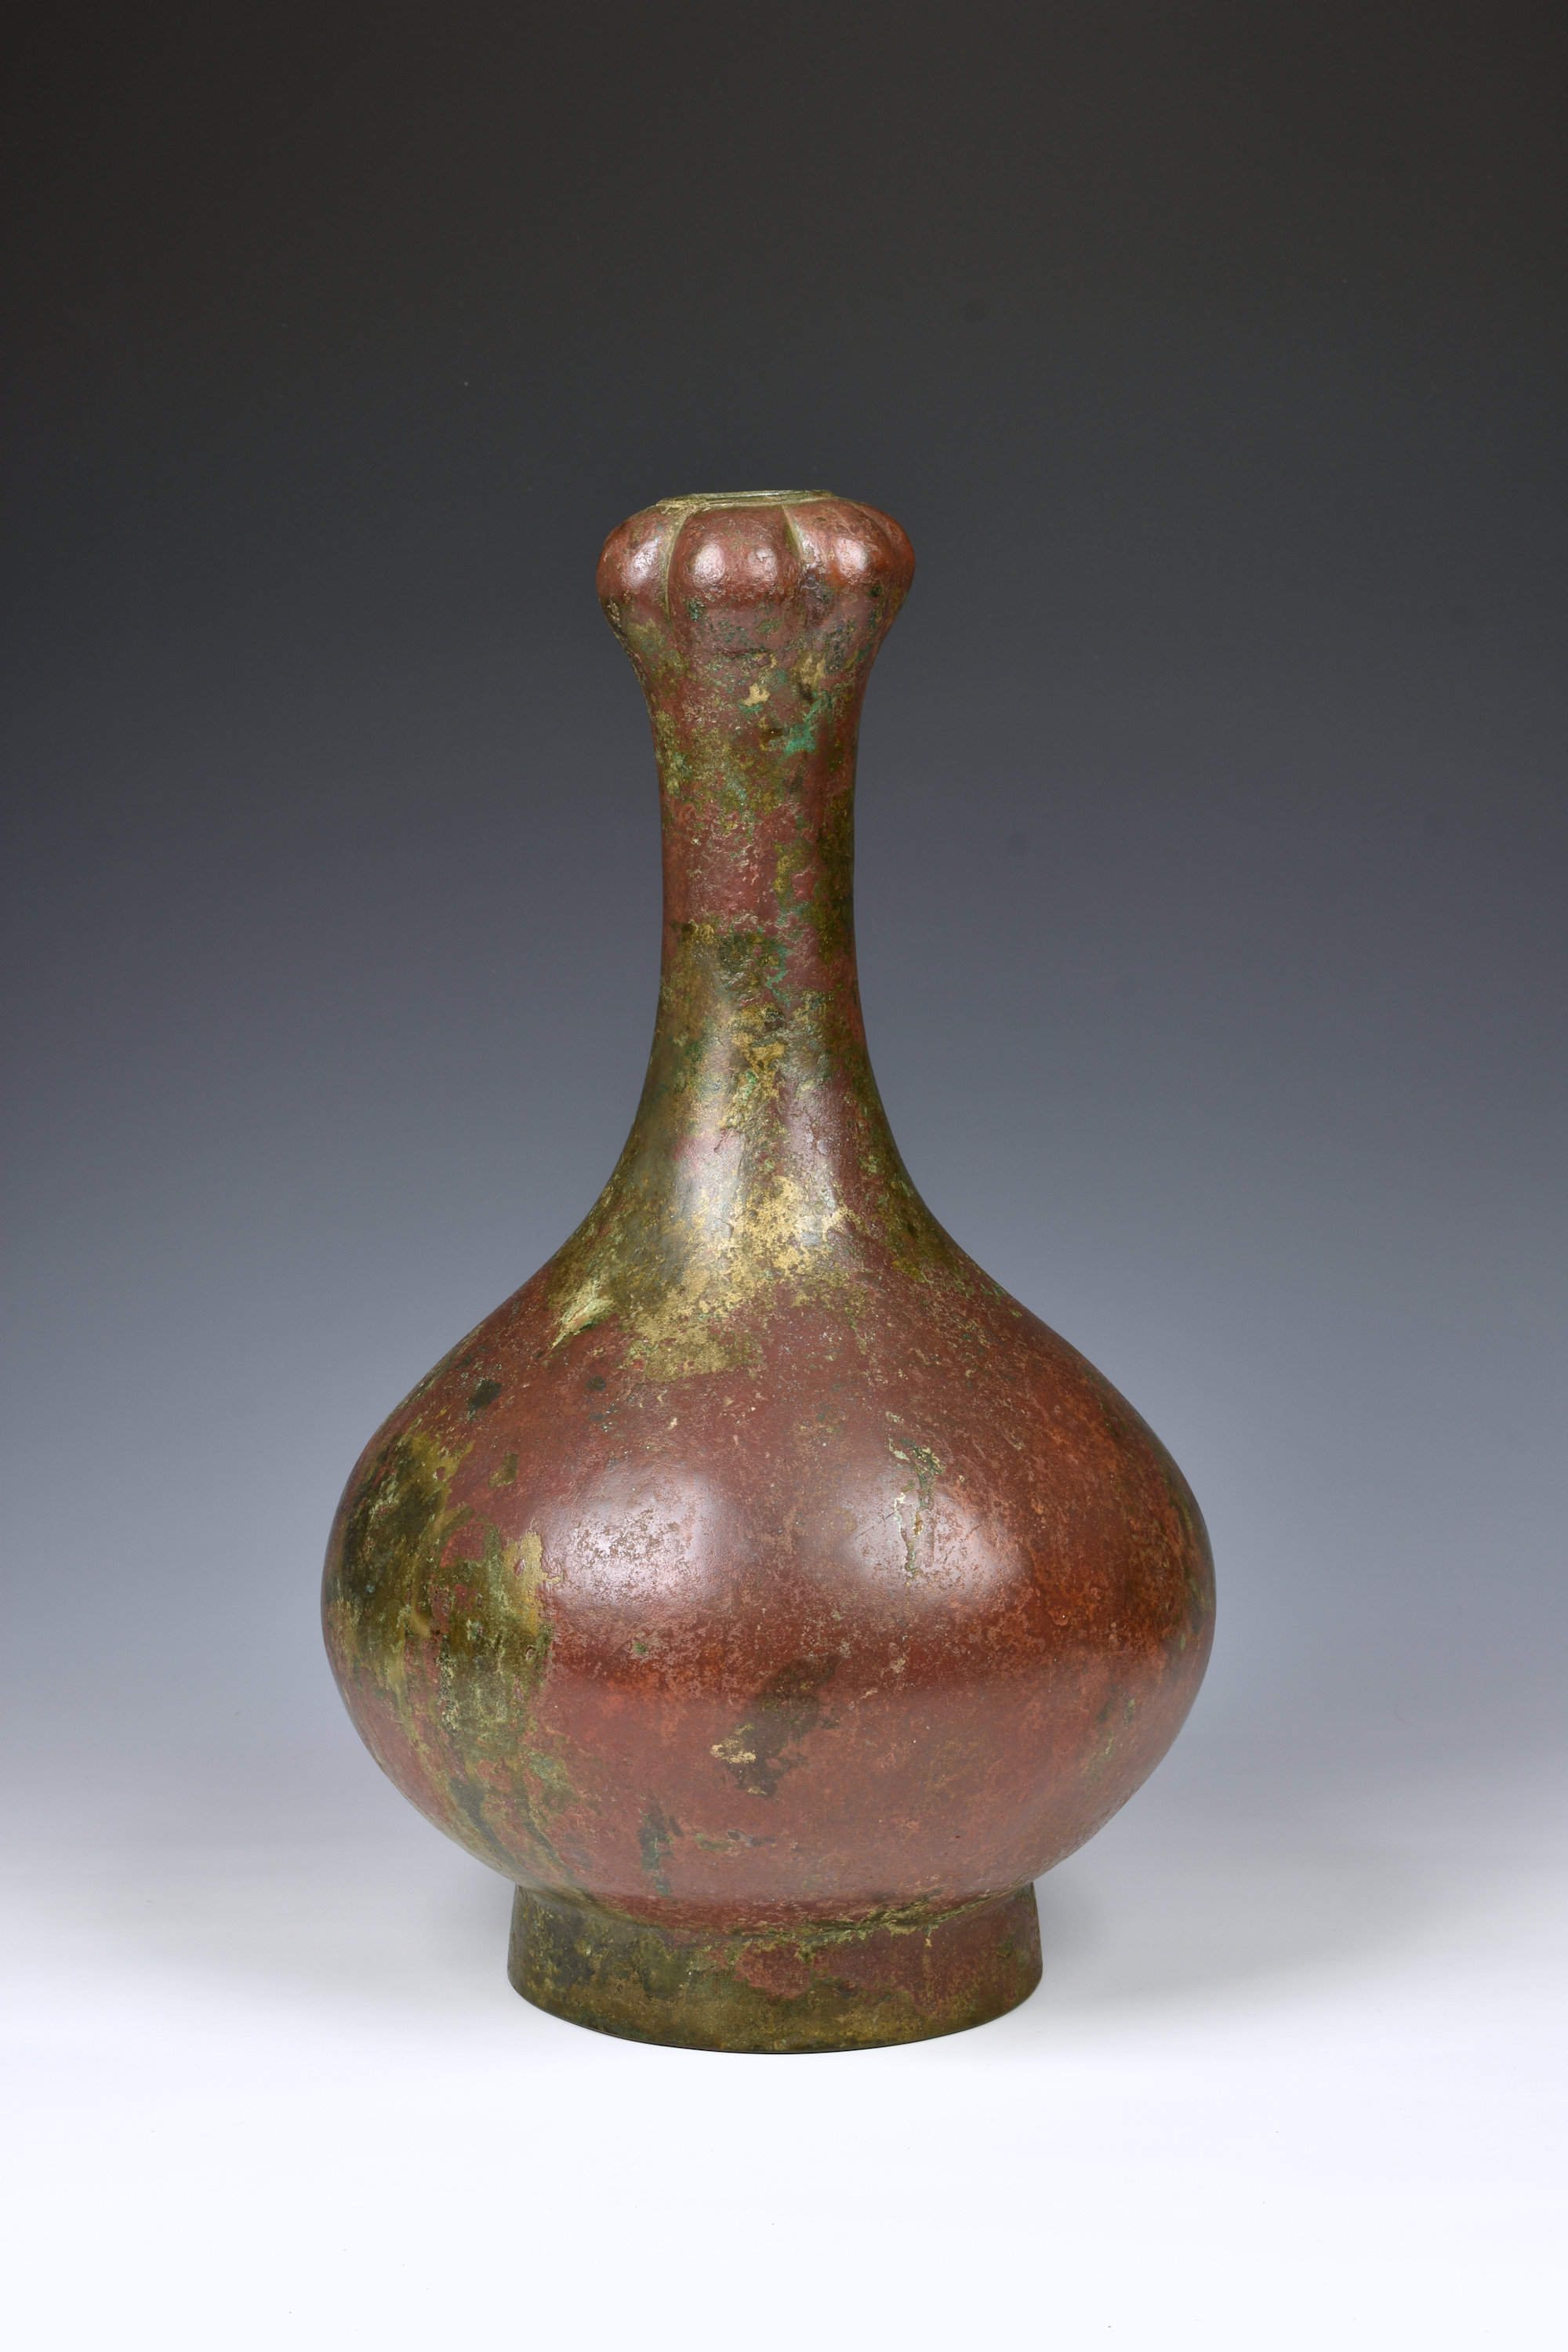 A Chinese bronze garlic head bottle vase, probably Han Dynasty (206BC-220AD), the compressed